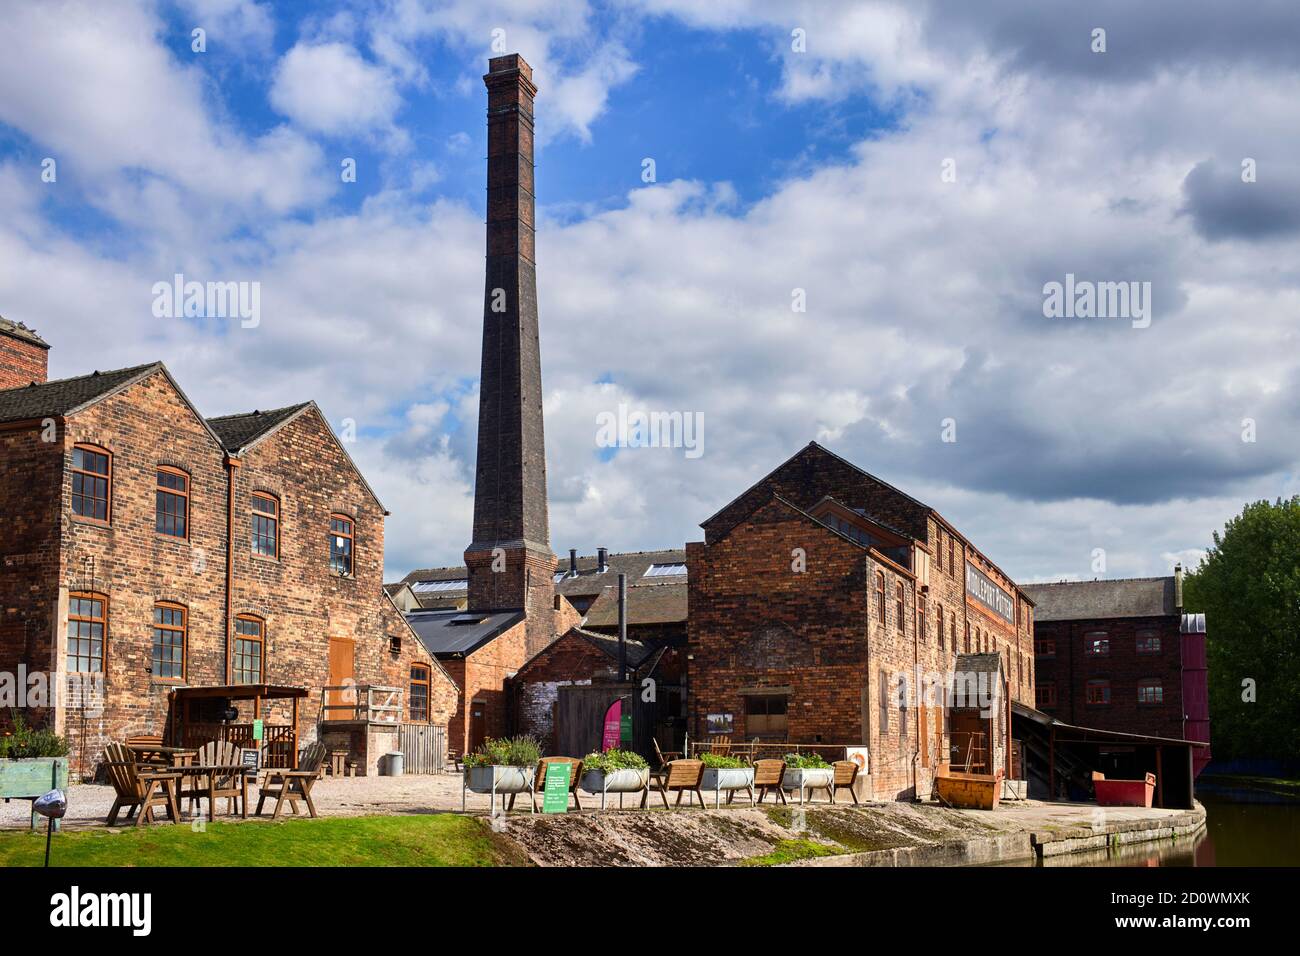 Middleport pottery tea rooms and moorings on the Trent and Mersey canal at Stoke on Trent Stock Photo